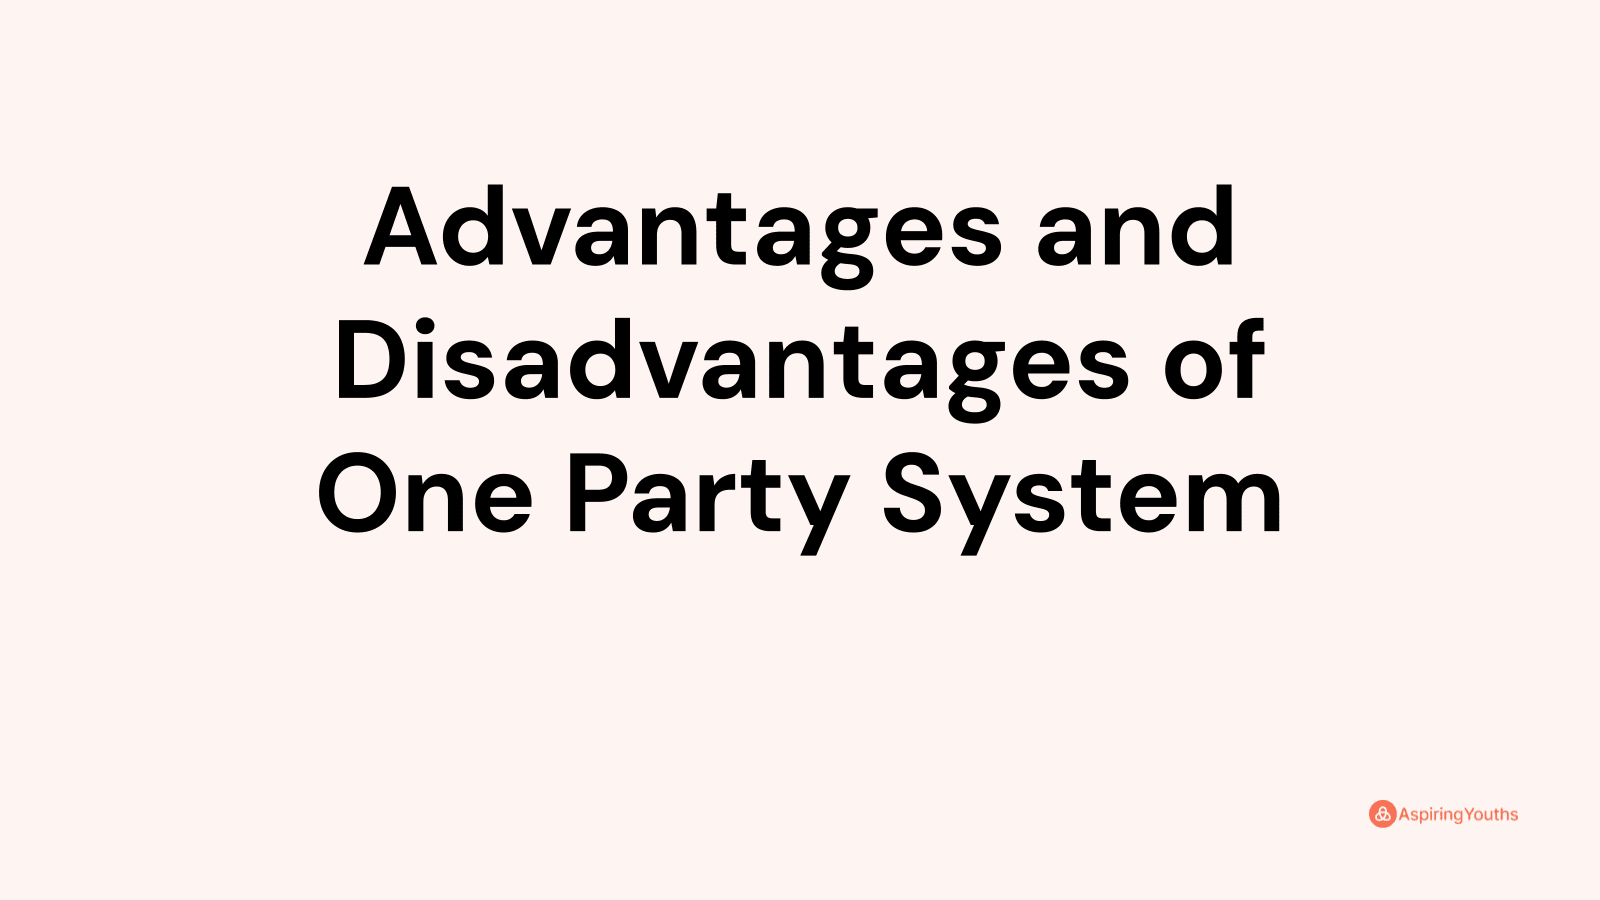 Advantages and disadvantages of One Party System